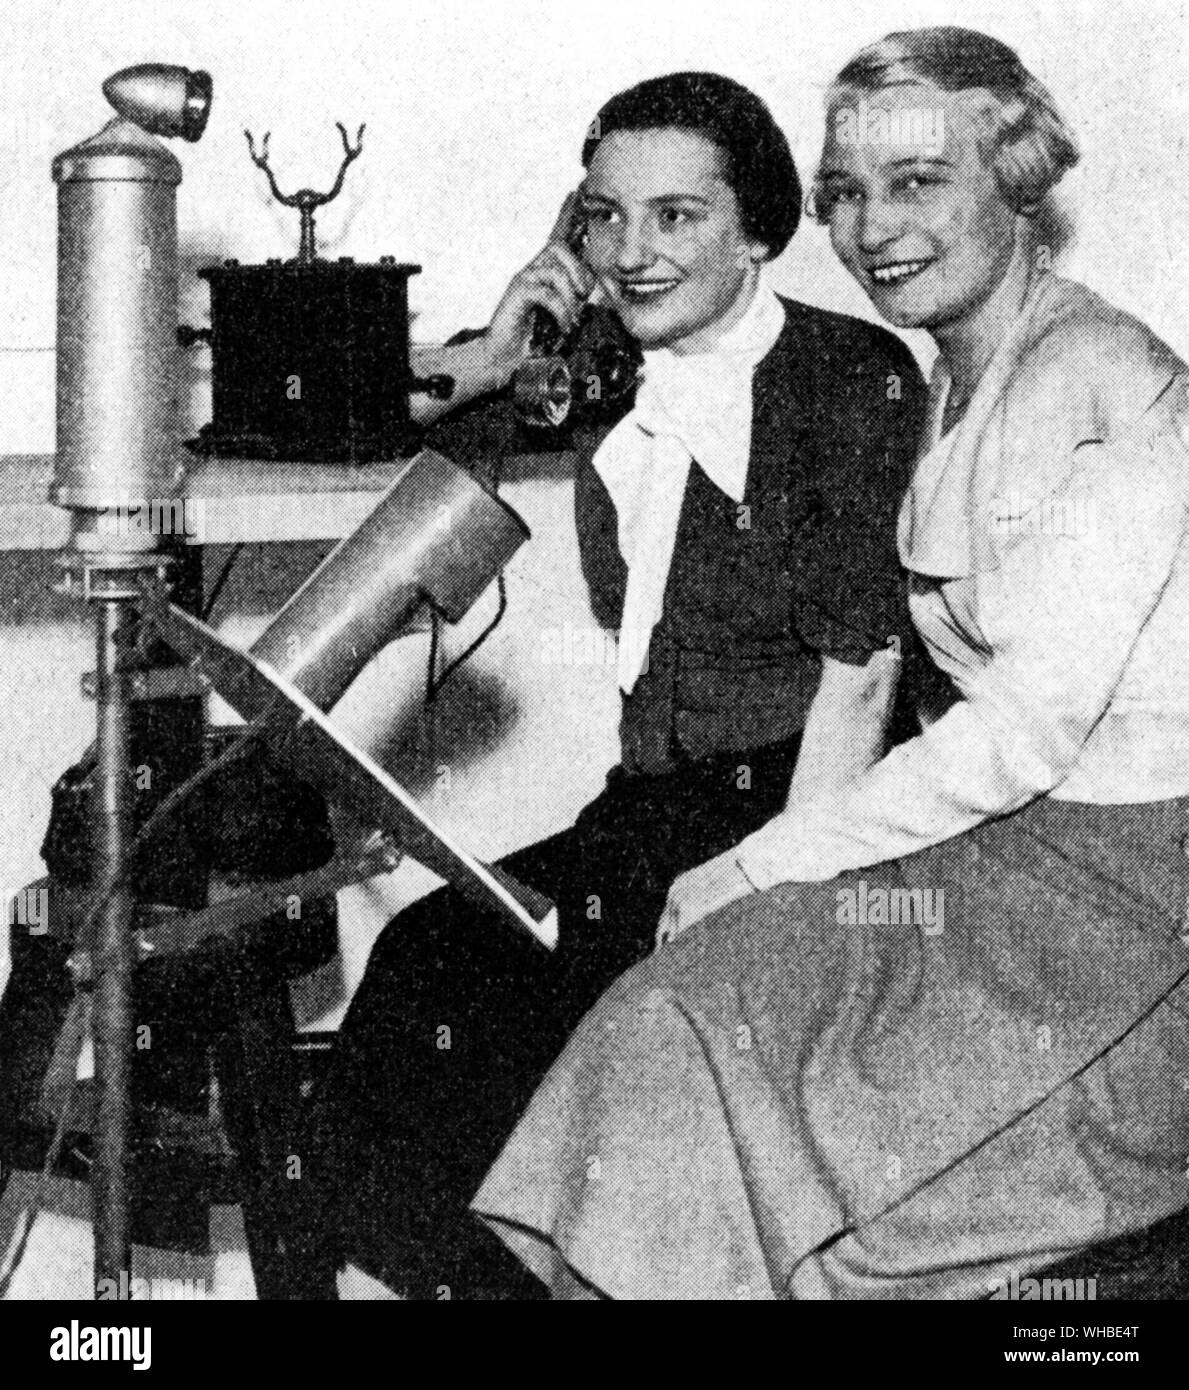 Ursula Patzschke (left) the world's first TV announcer (1934), with Annemarie Beck, who joined the German television service as an announcer in 1935. Stock Photo